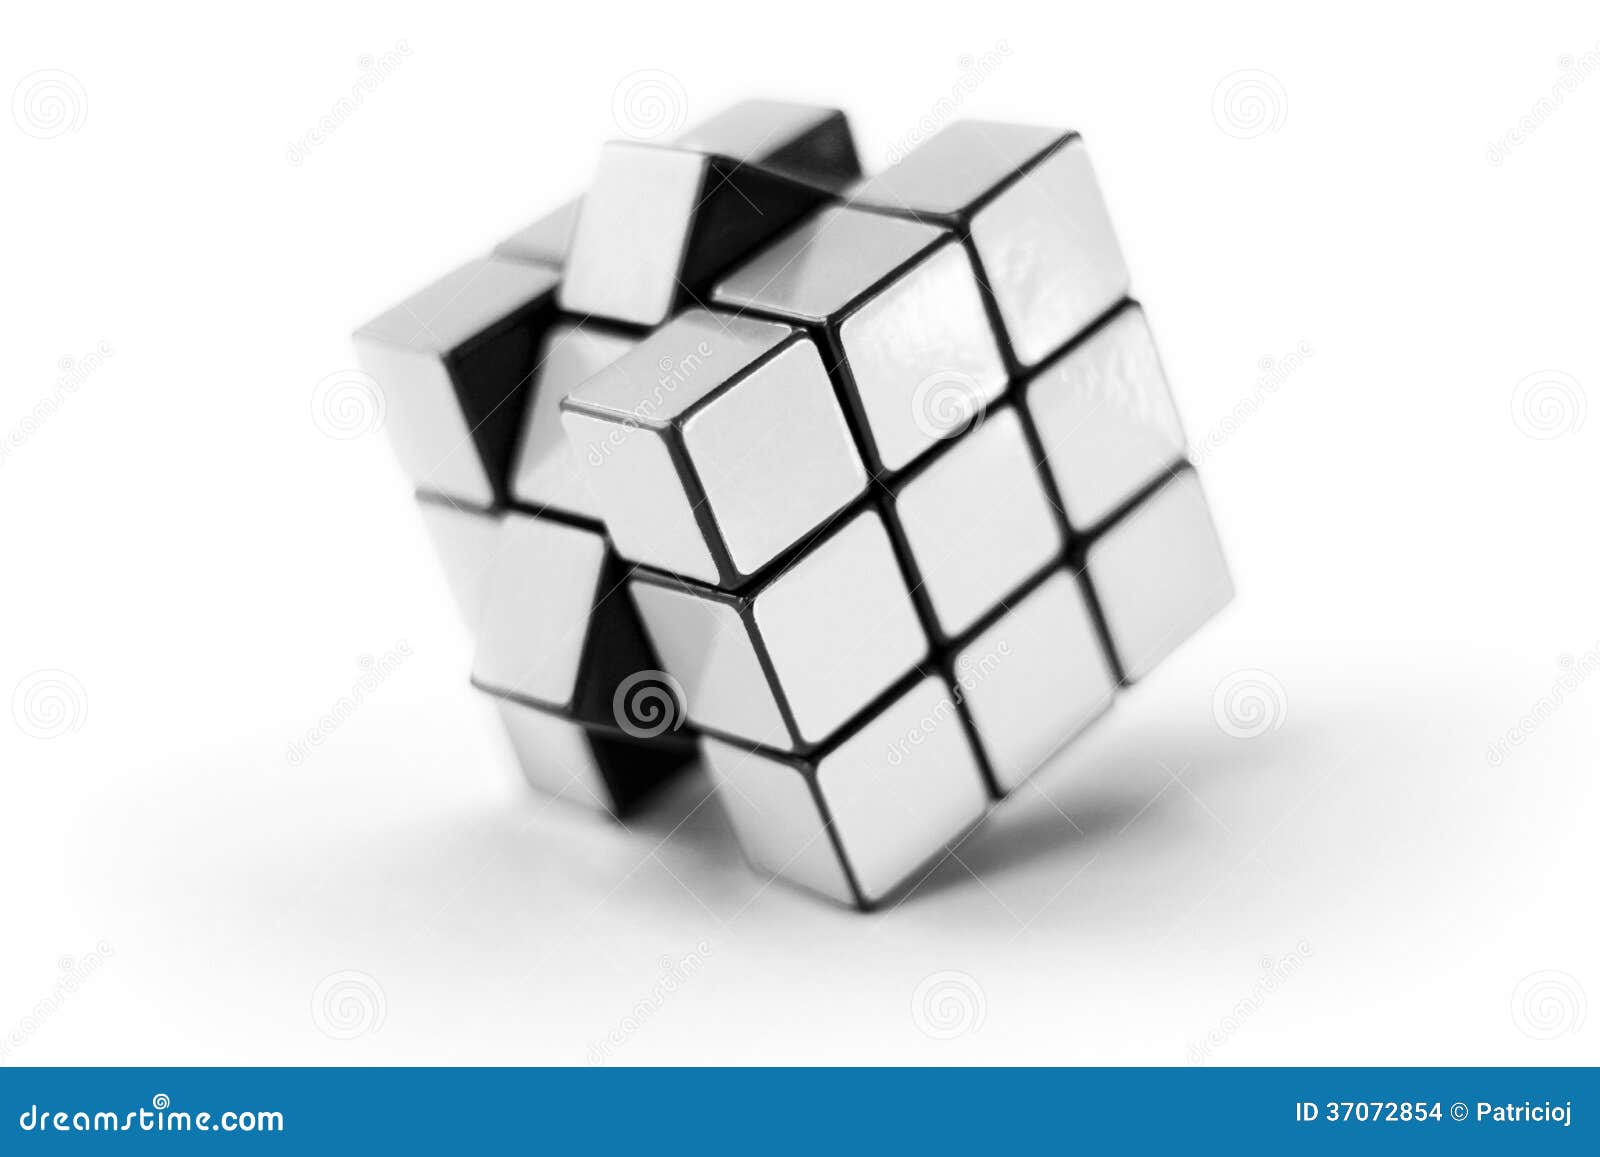 White cube puzzle editorial stock image. Image of cutout - 37072854